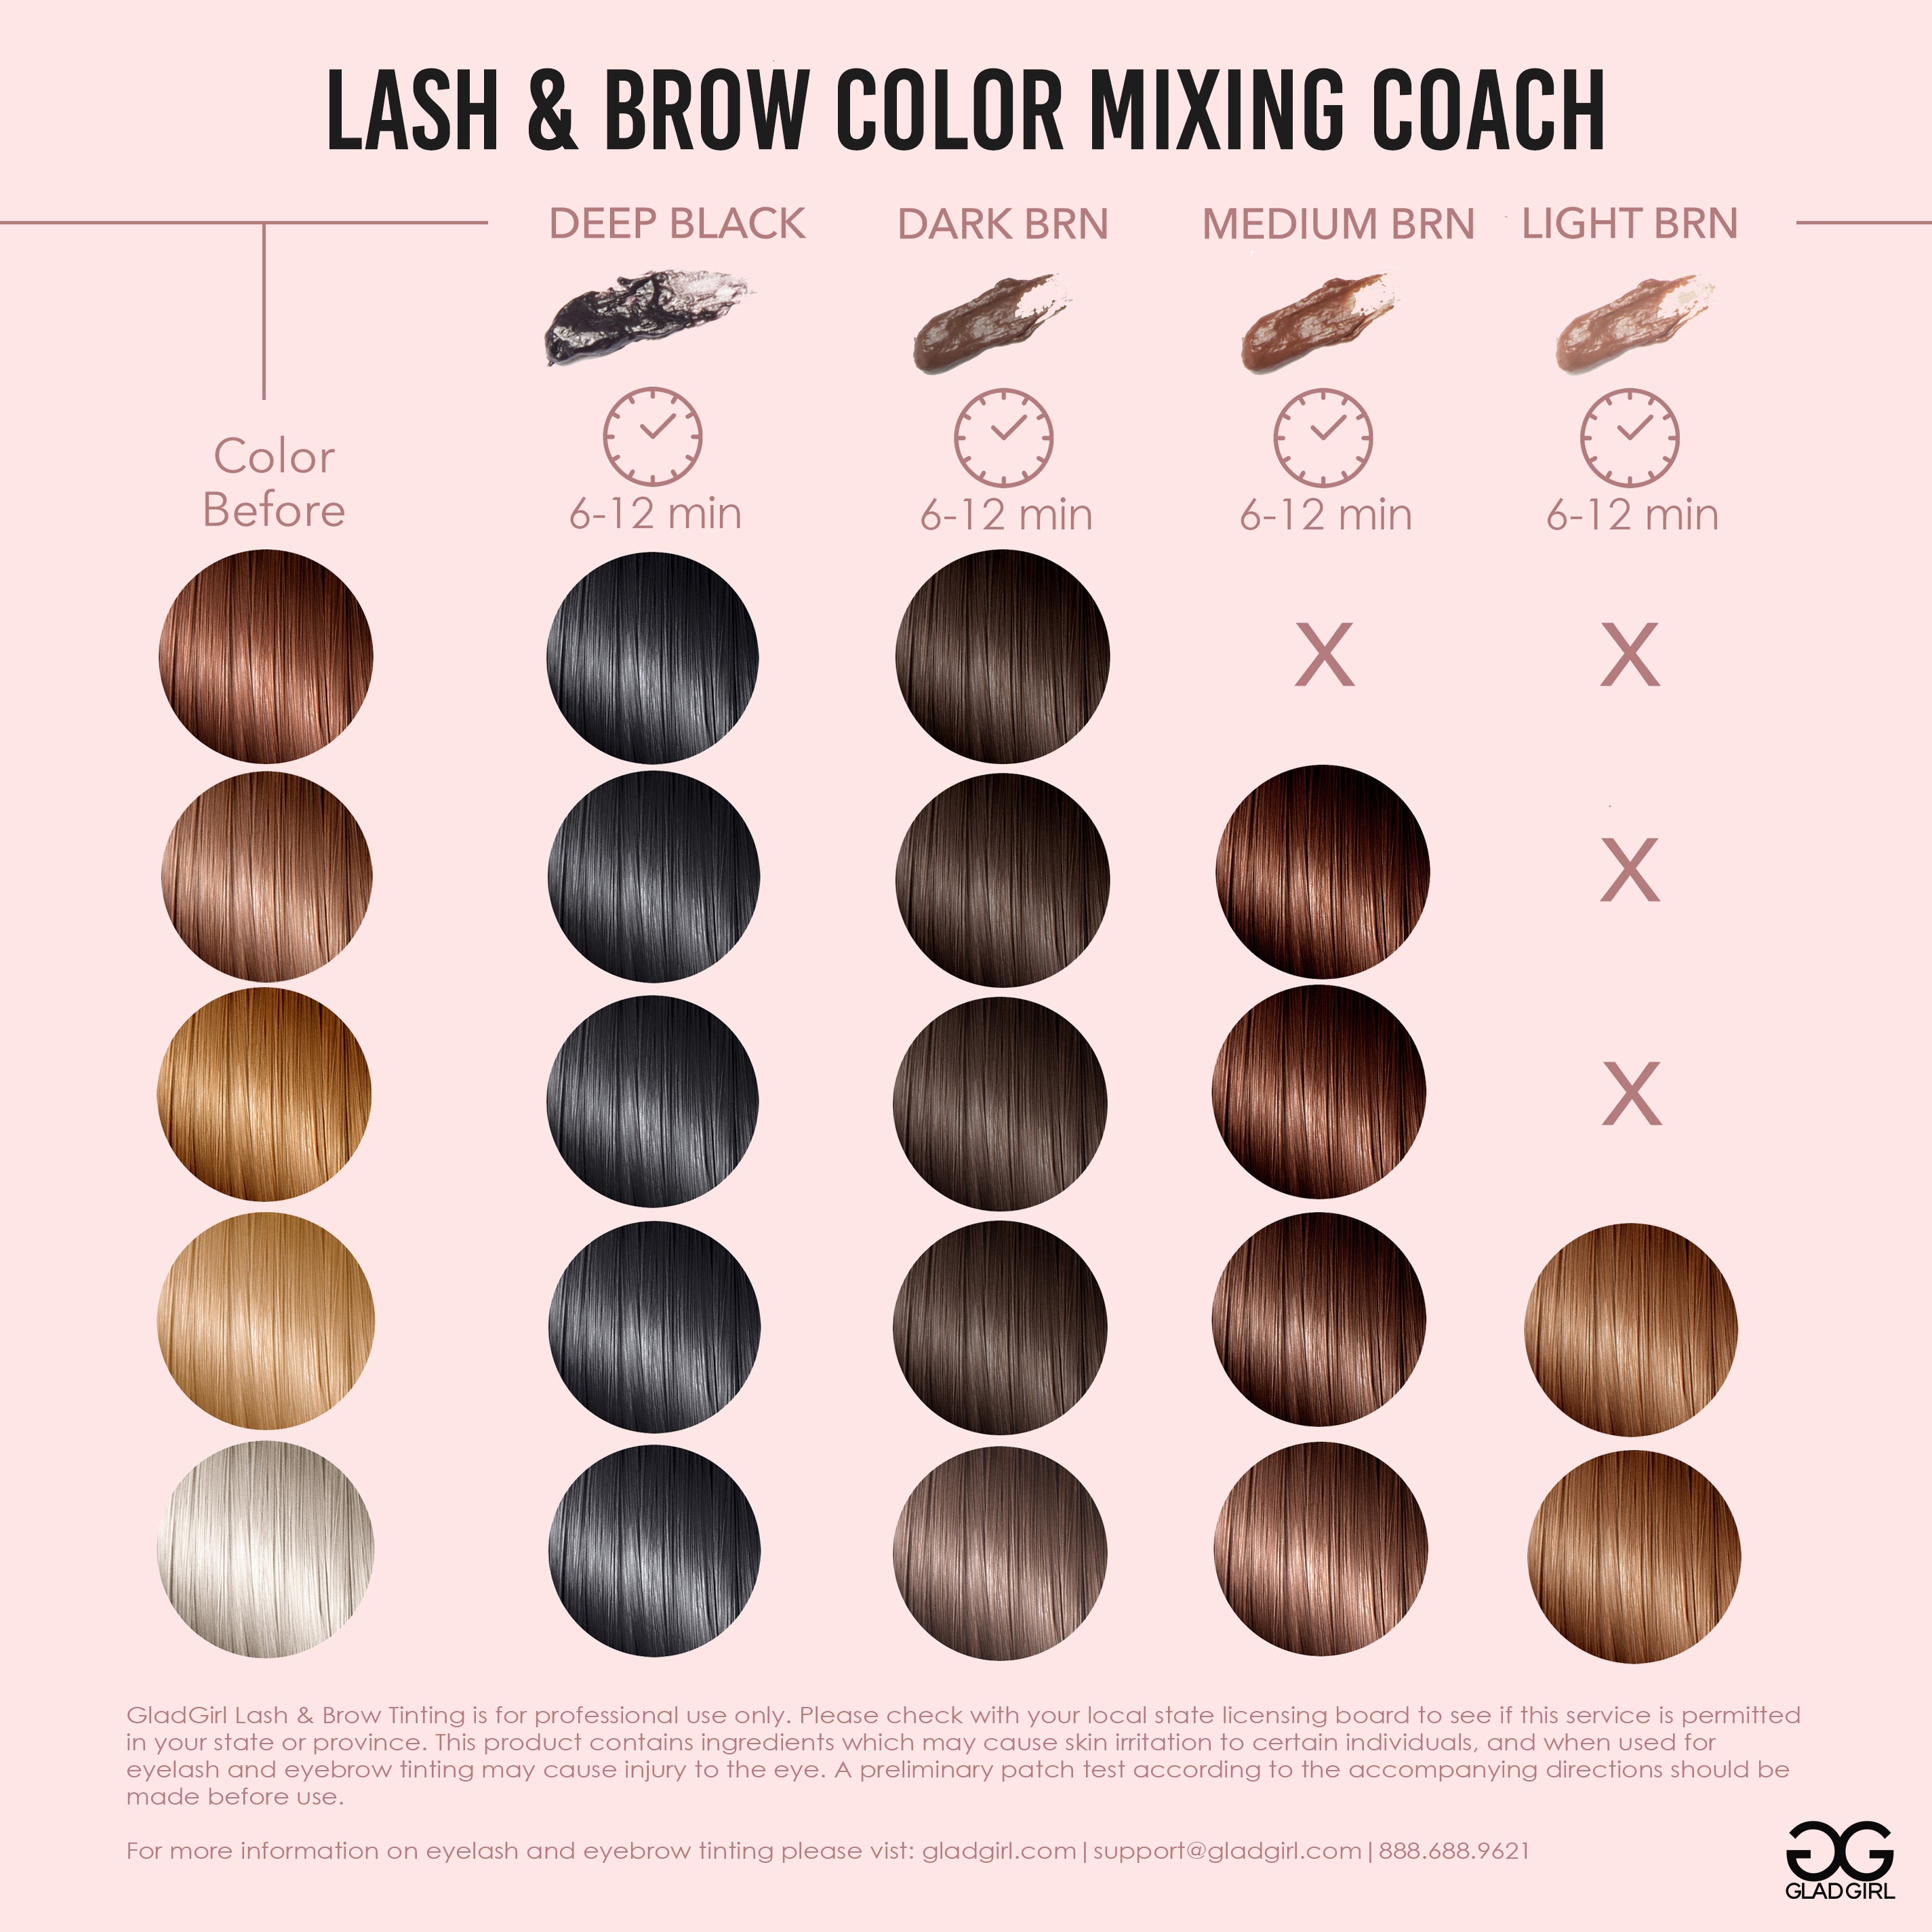 Richesse hair color chart, instructions, ingredients